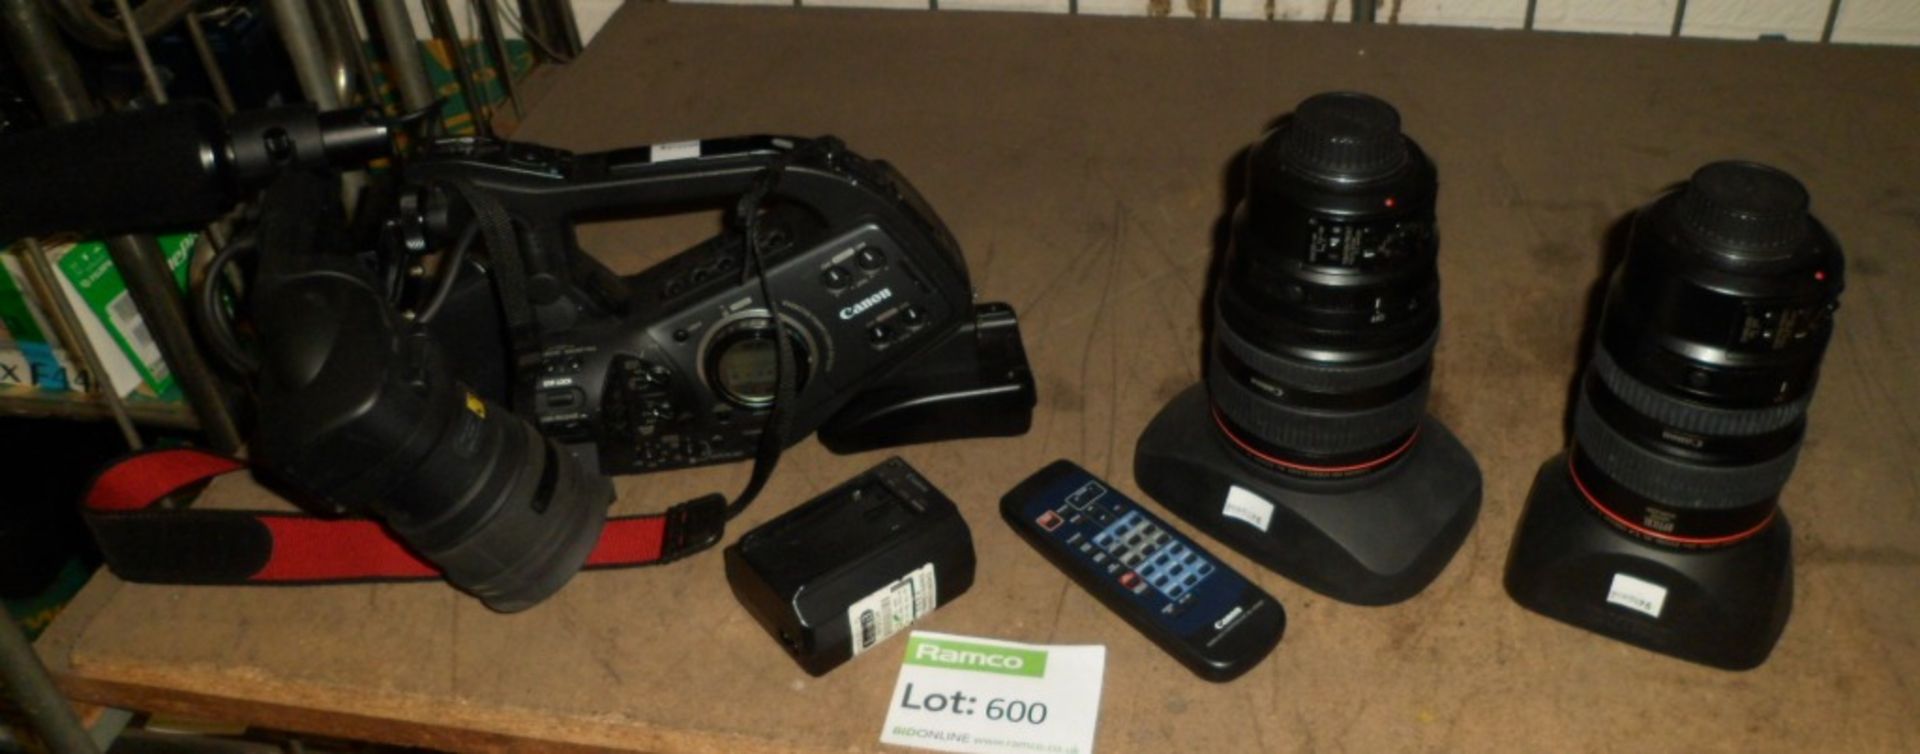 Canon XLH1 video camera, 20x & 6x Zoom lenses and accessories